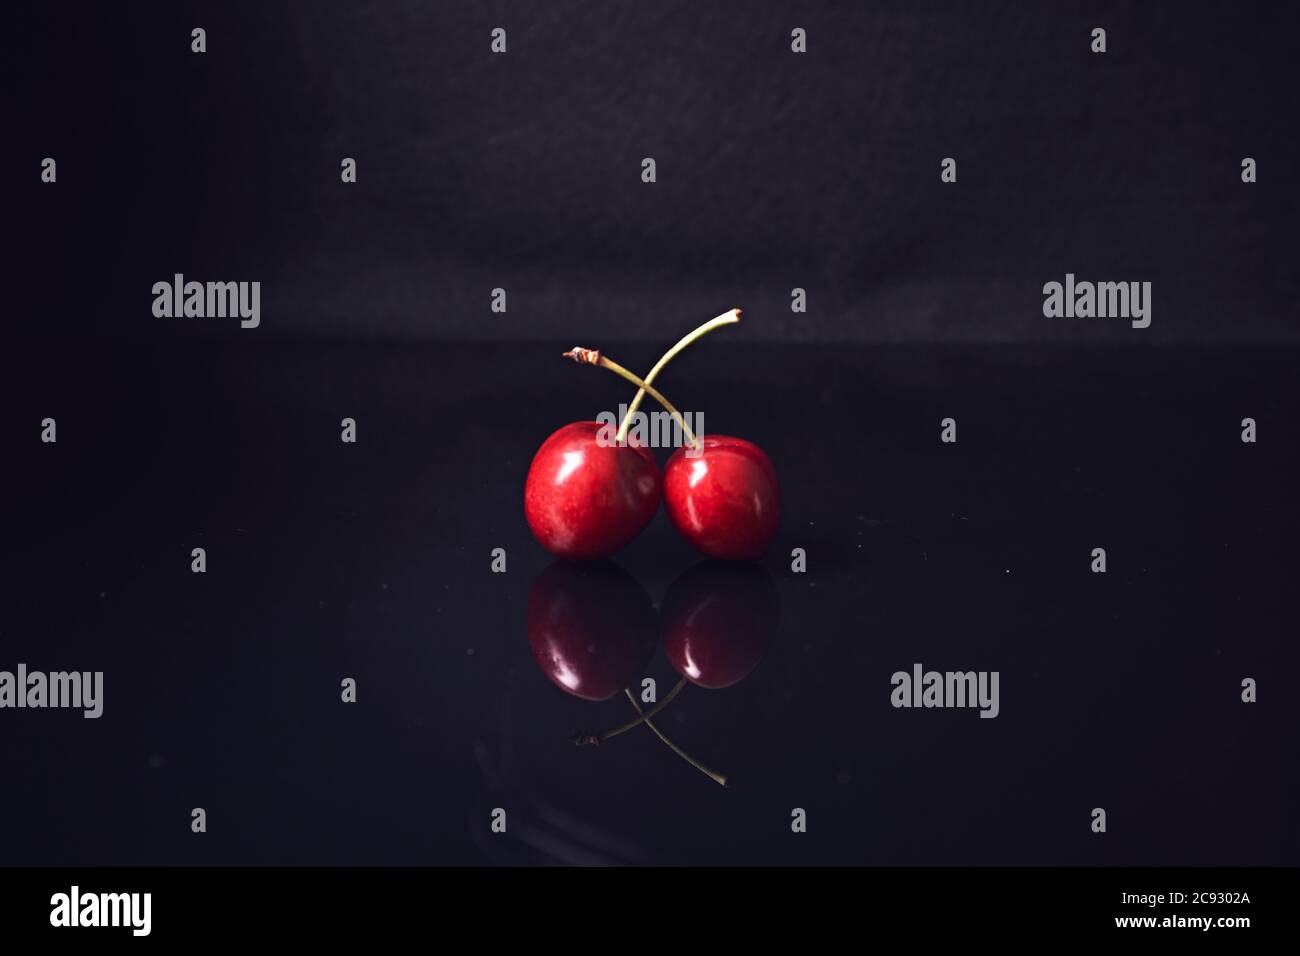 reflection of two cherries on black background Stock Photo